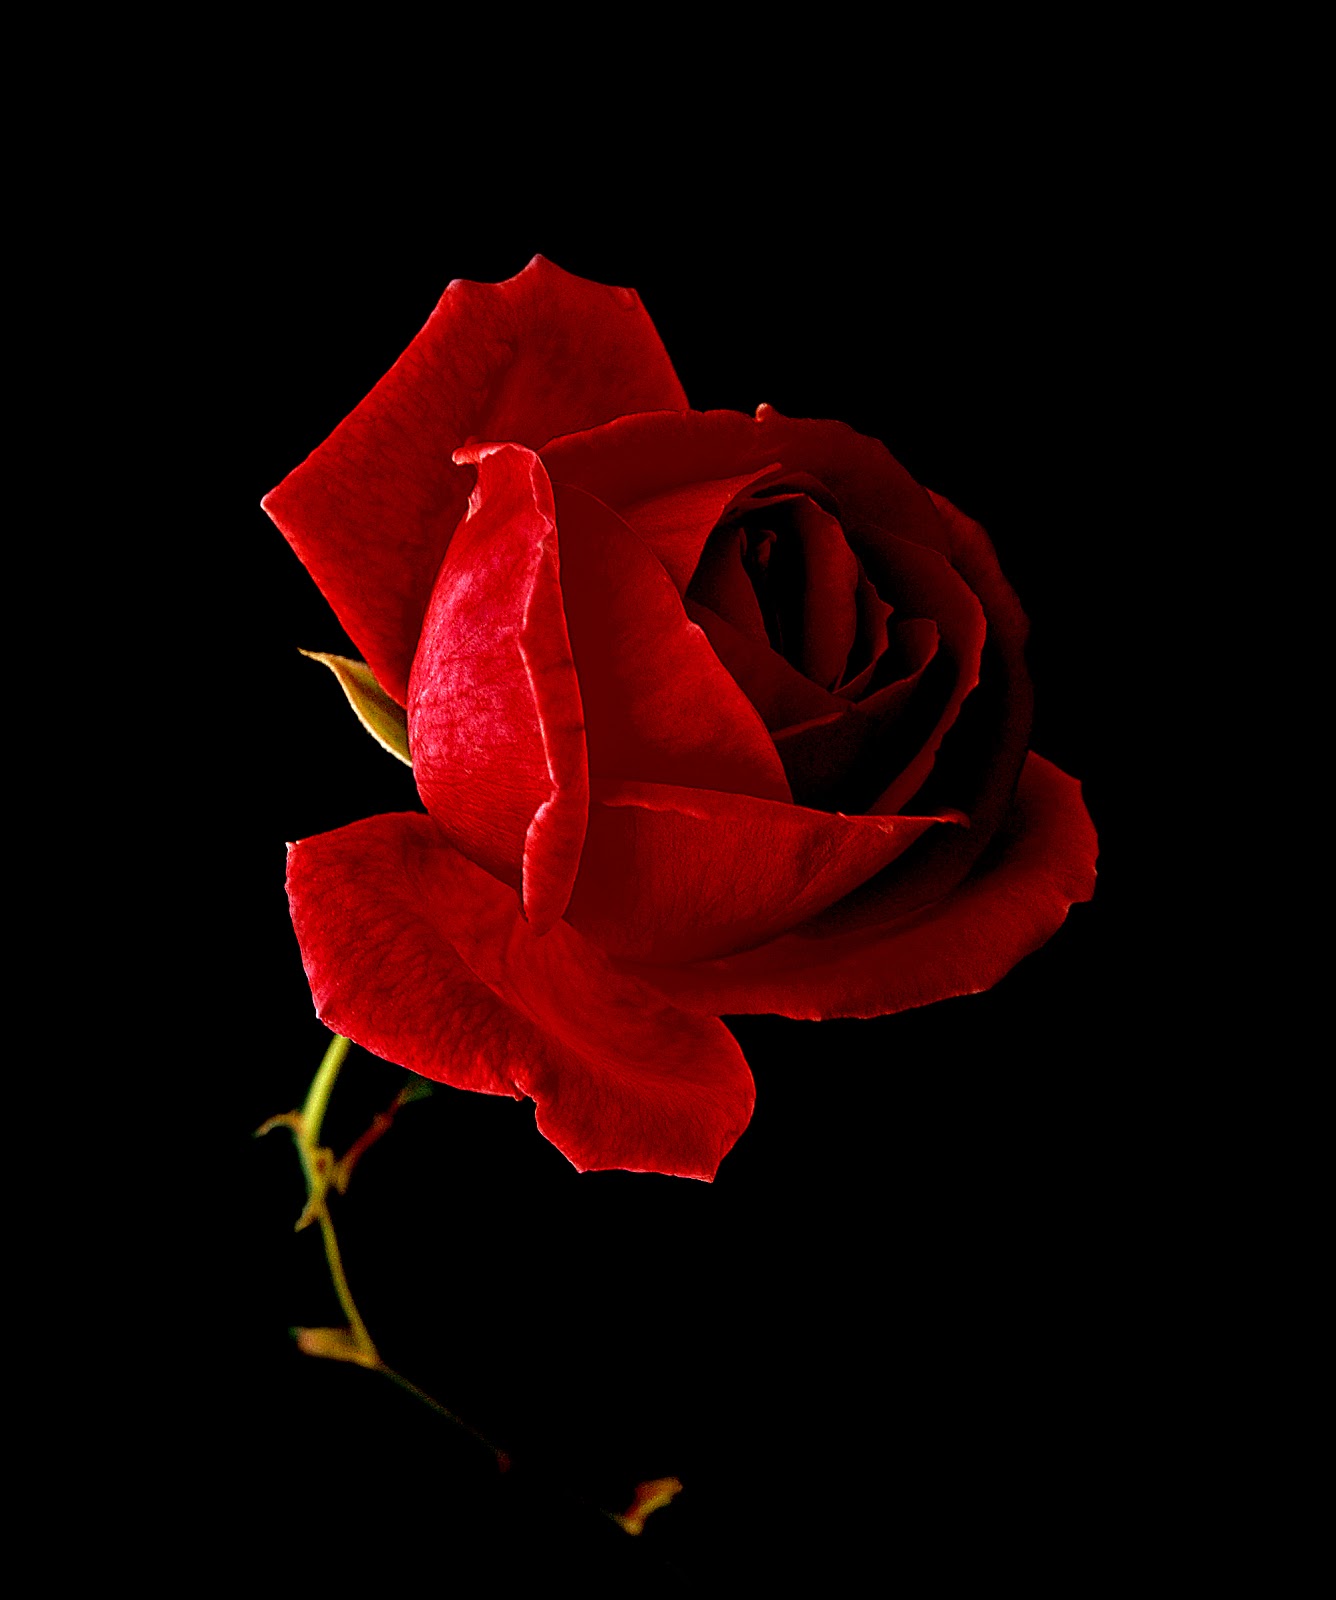 Red Rose Black And White Background Red rose on black background